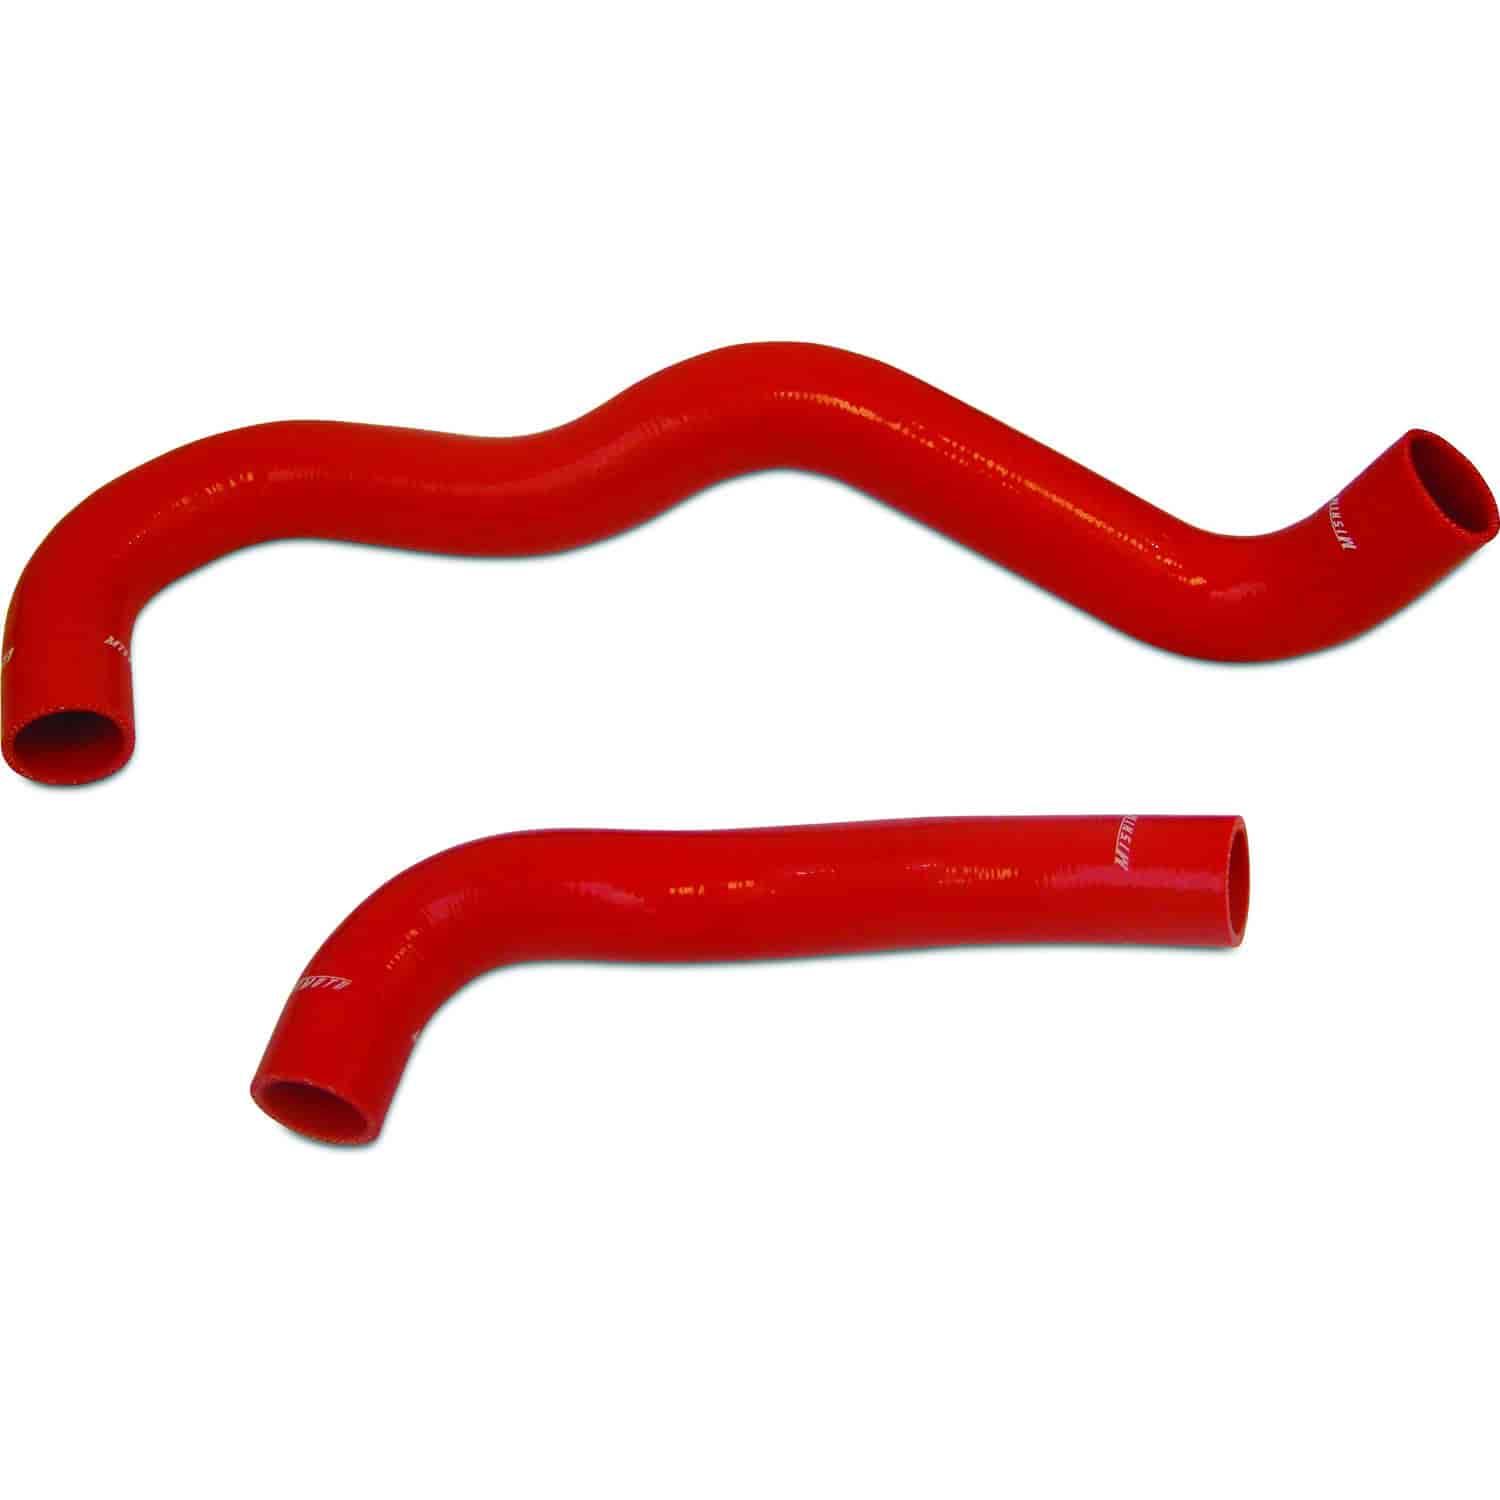 Silicone Radiator Hose Kit for 2003-2004 Ford 6.0L Powerstroke [Red]